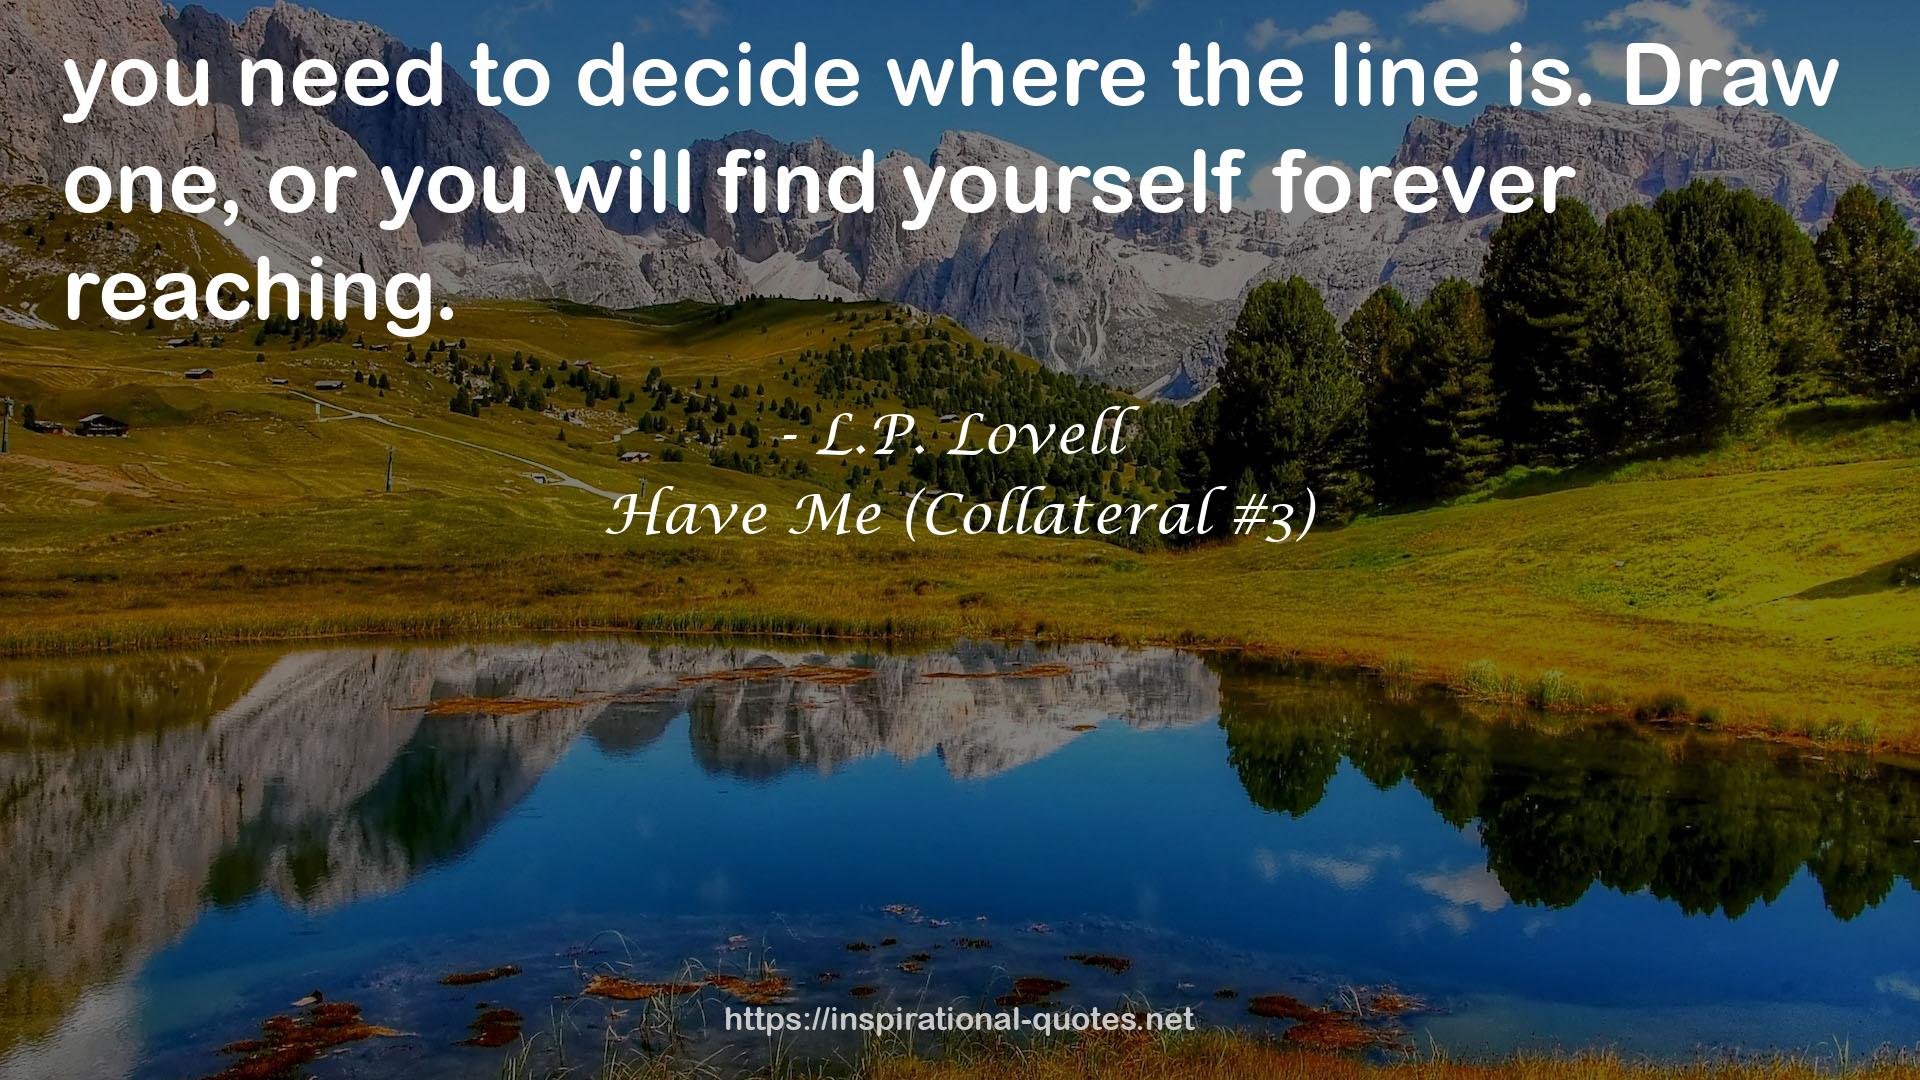 Have Me (Collateral #3) QUOTES